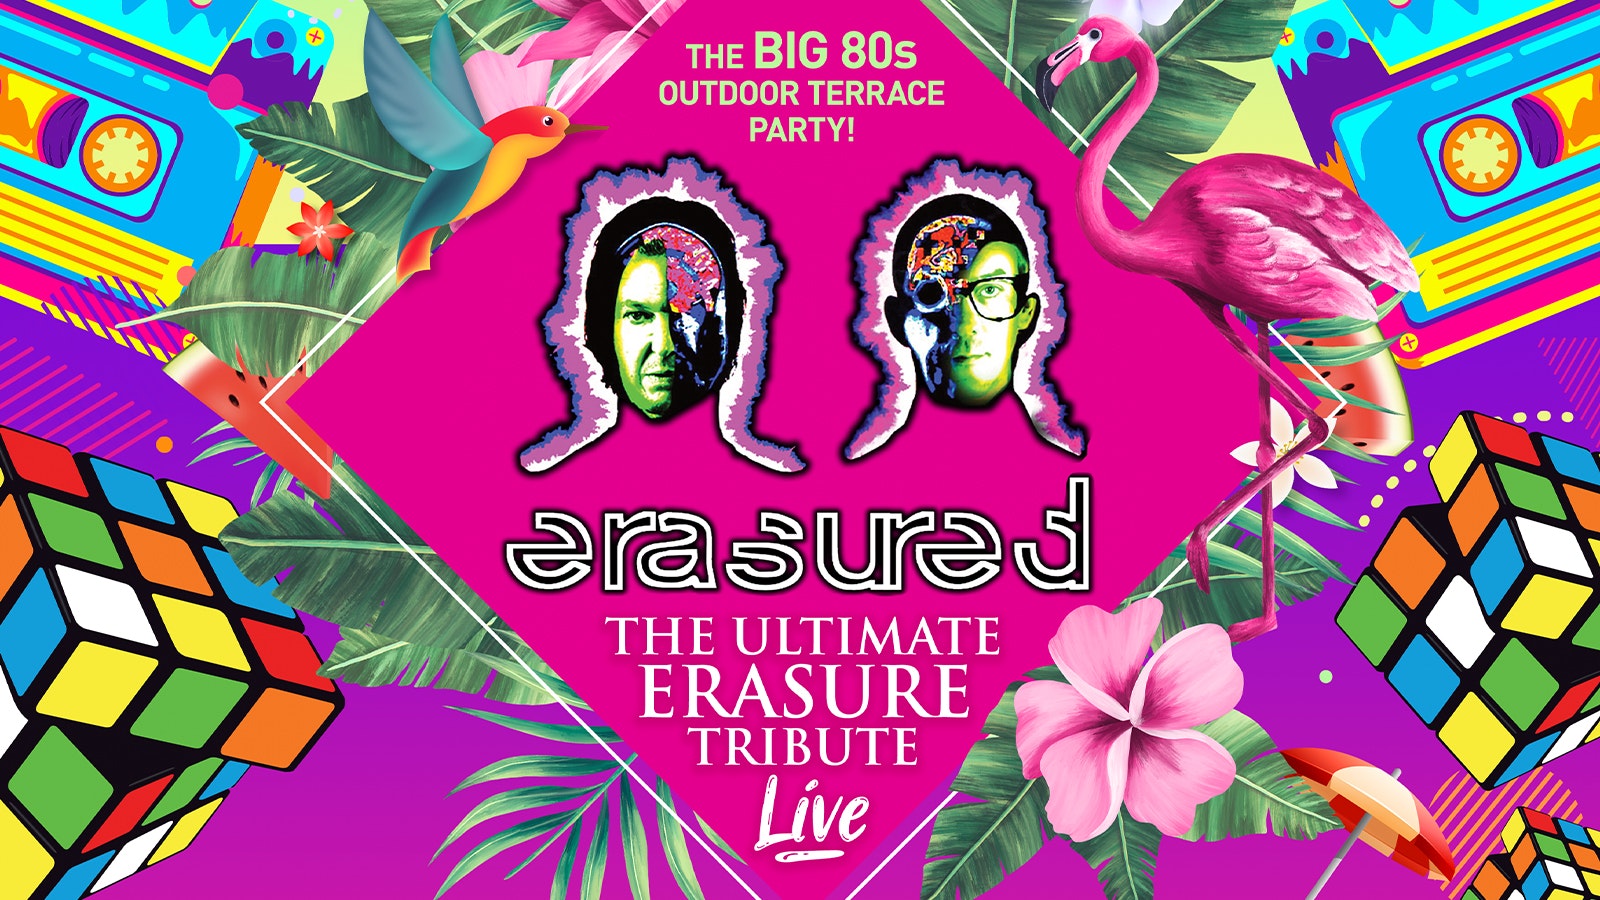 BIG 80s OUTDOOR TERRACE PARTY LIVE ft ERASURE’S Greatest Hits & 80s Party